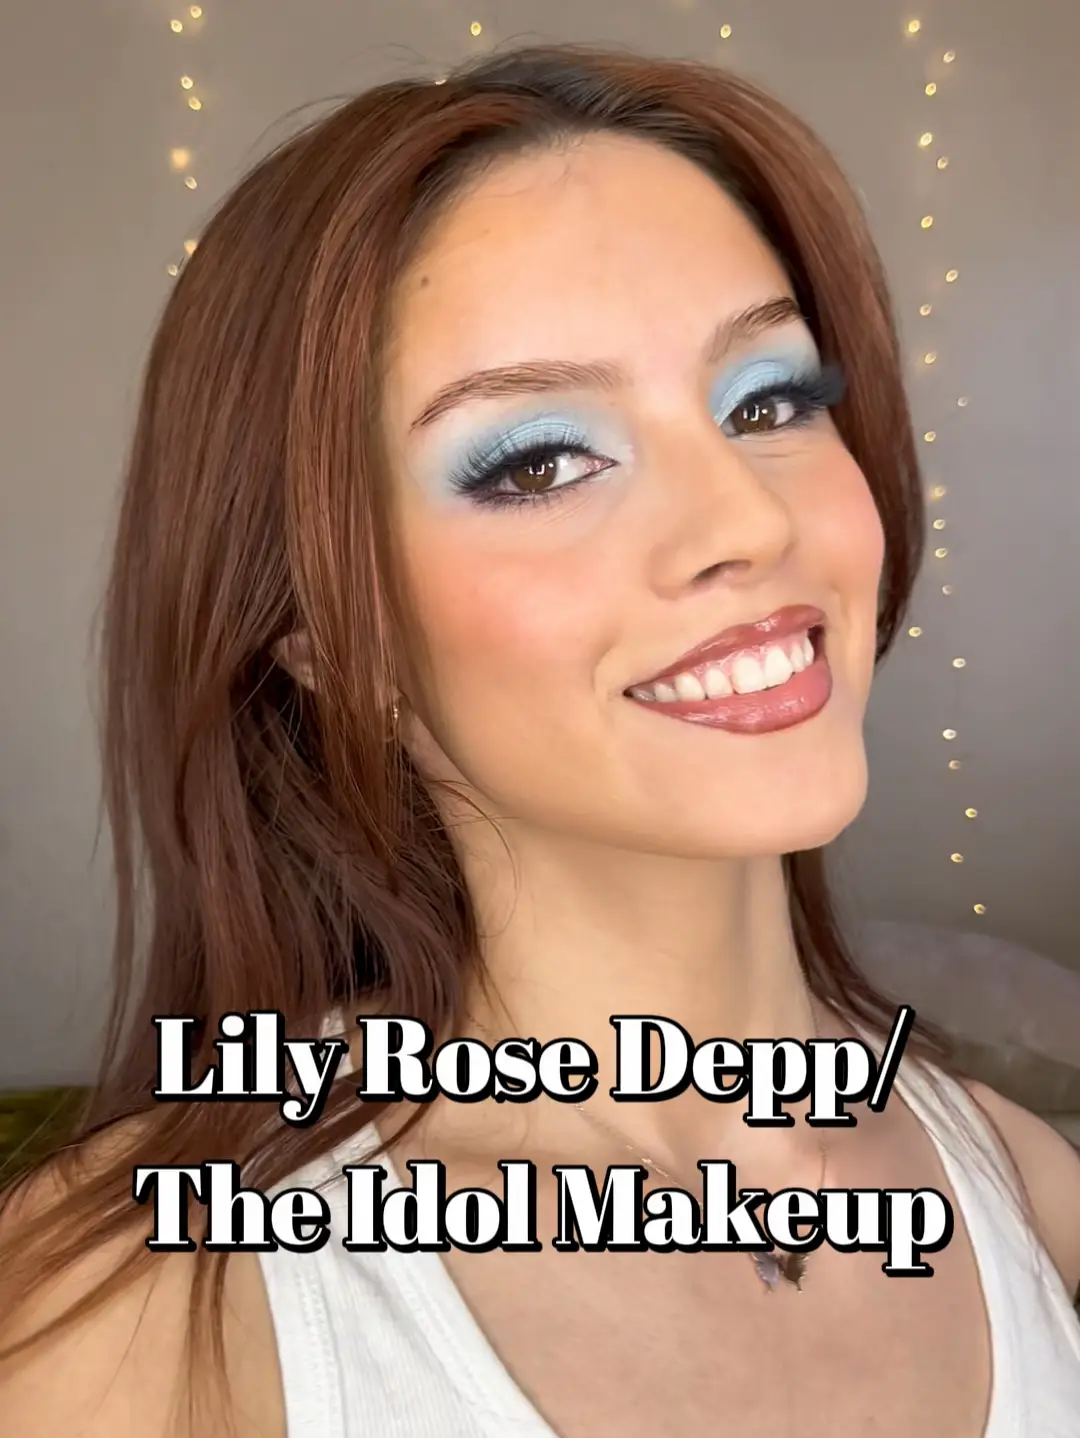 Lily Rose Depp/ The Idol Makeup, Video published by zayrasandoval